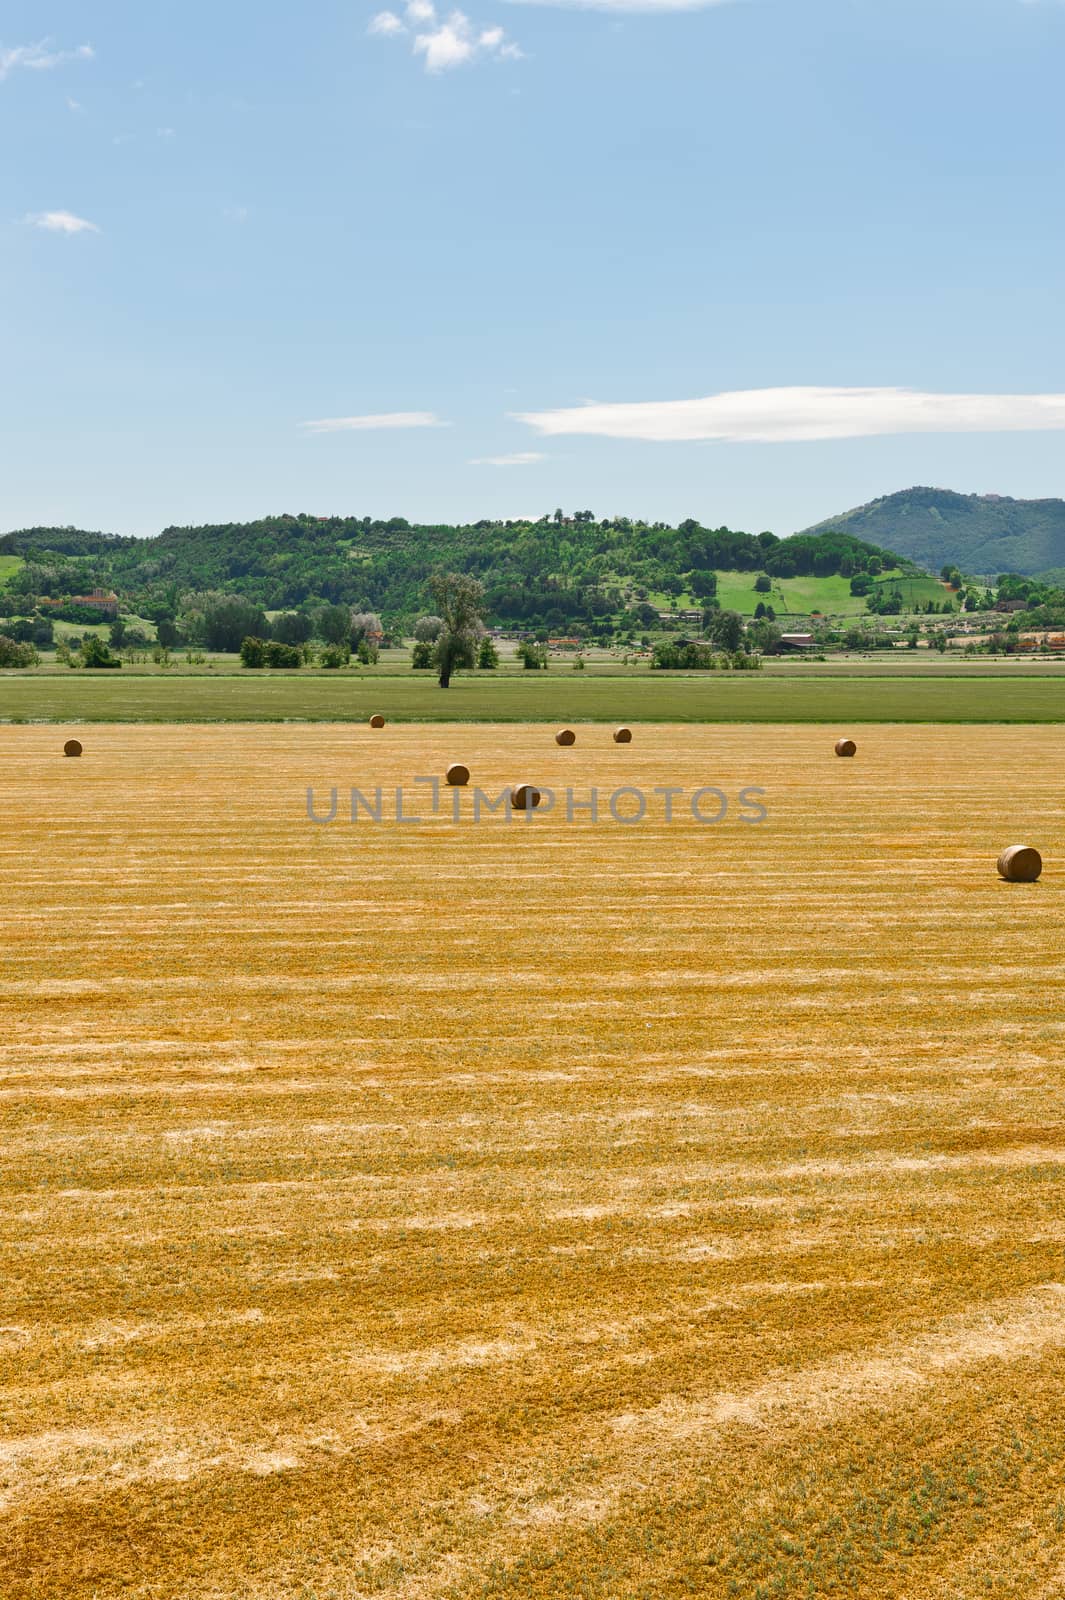 Landscape with Many Hay Bales  in Italy